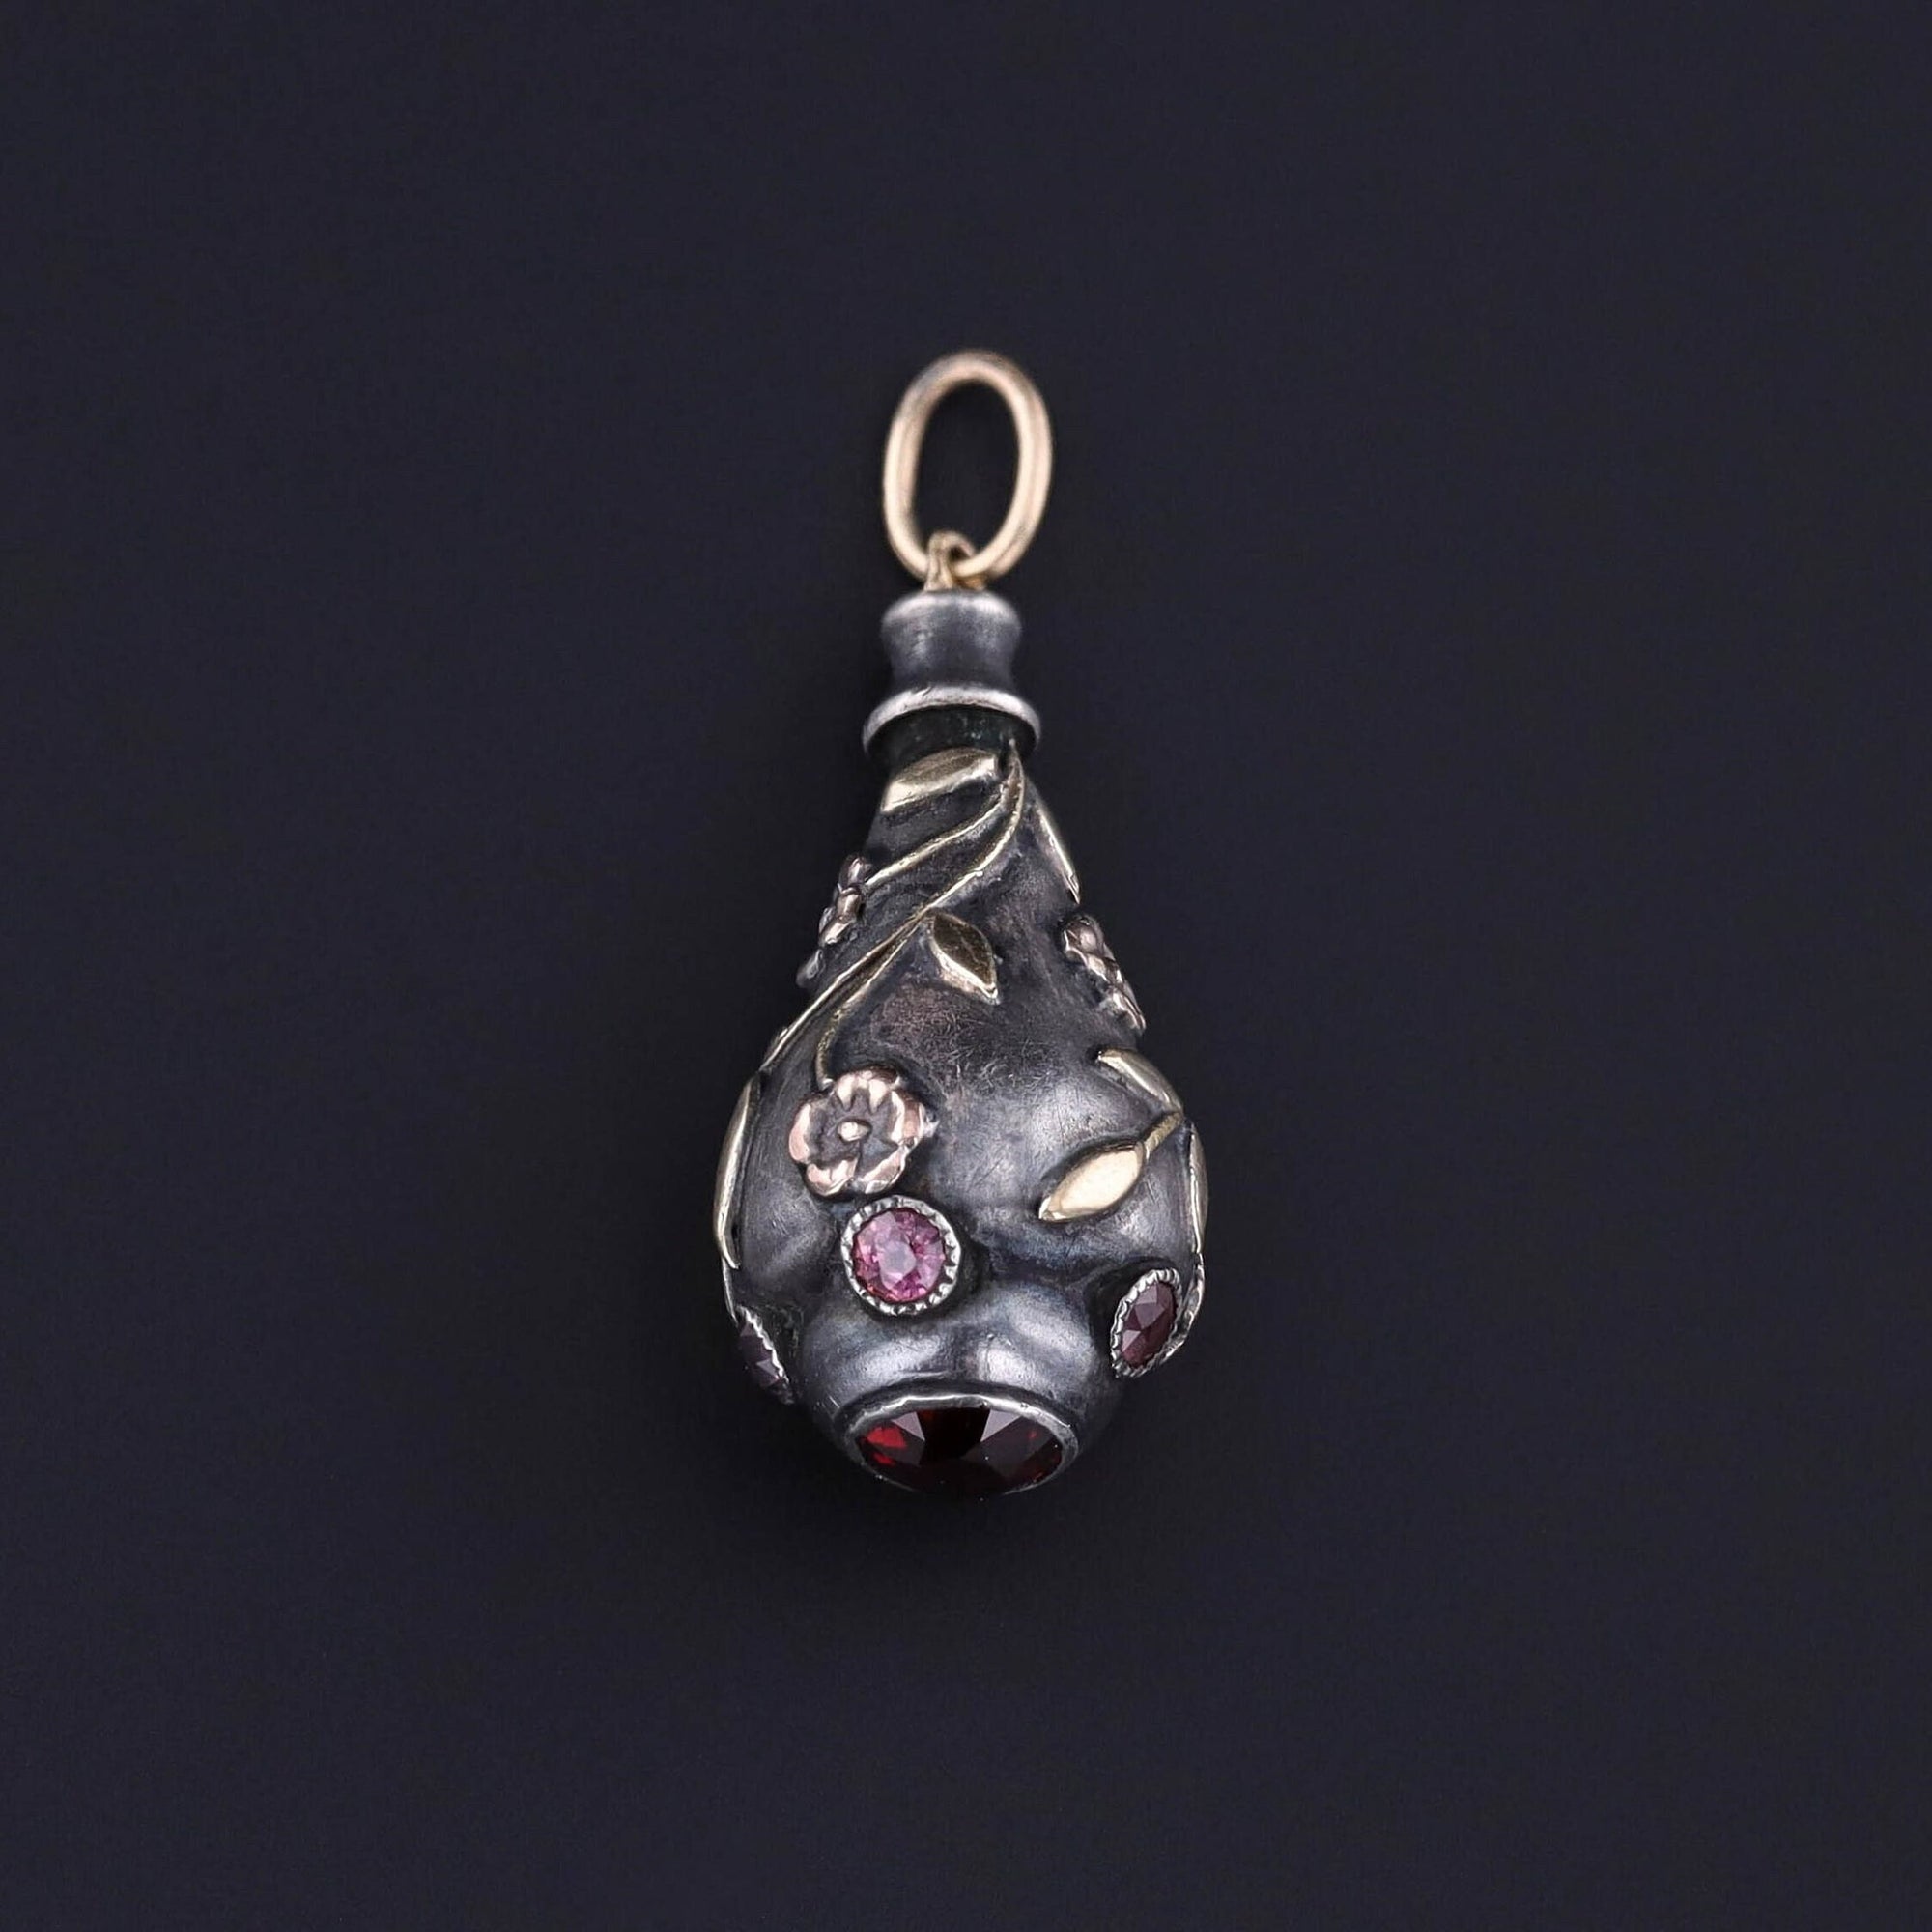 Antique Garnet Pendant of Silver and Gold